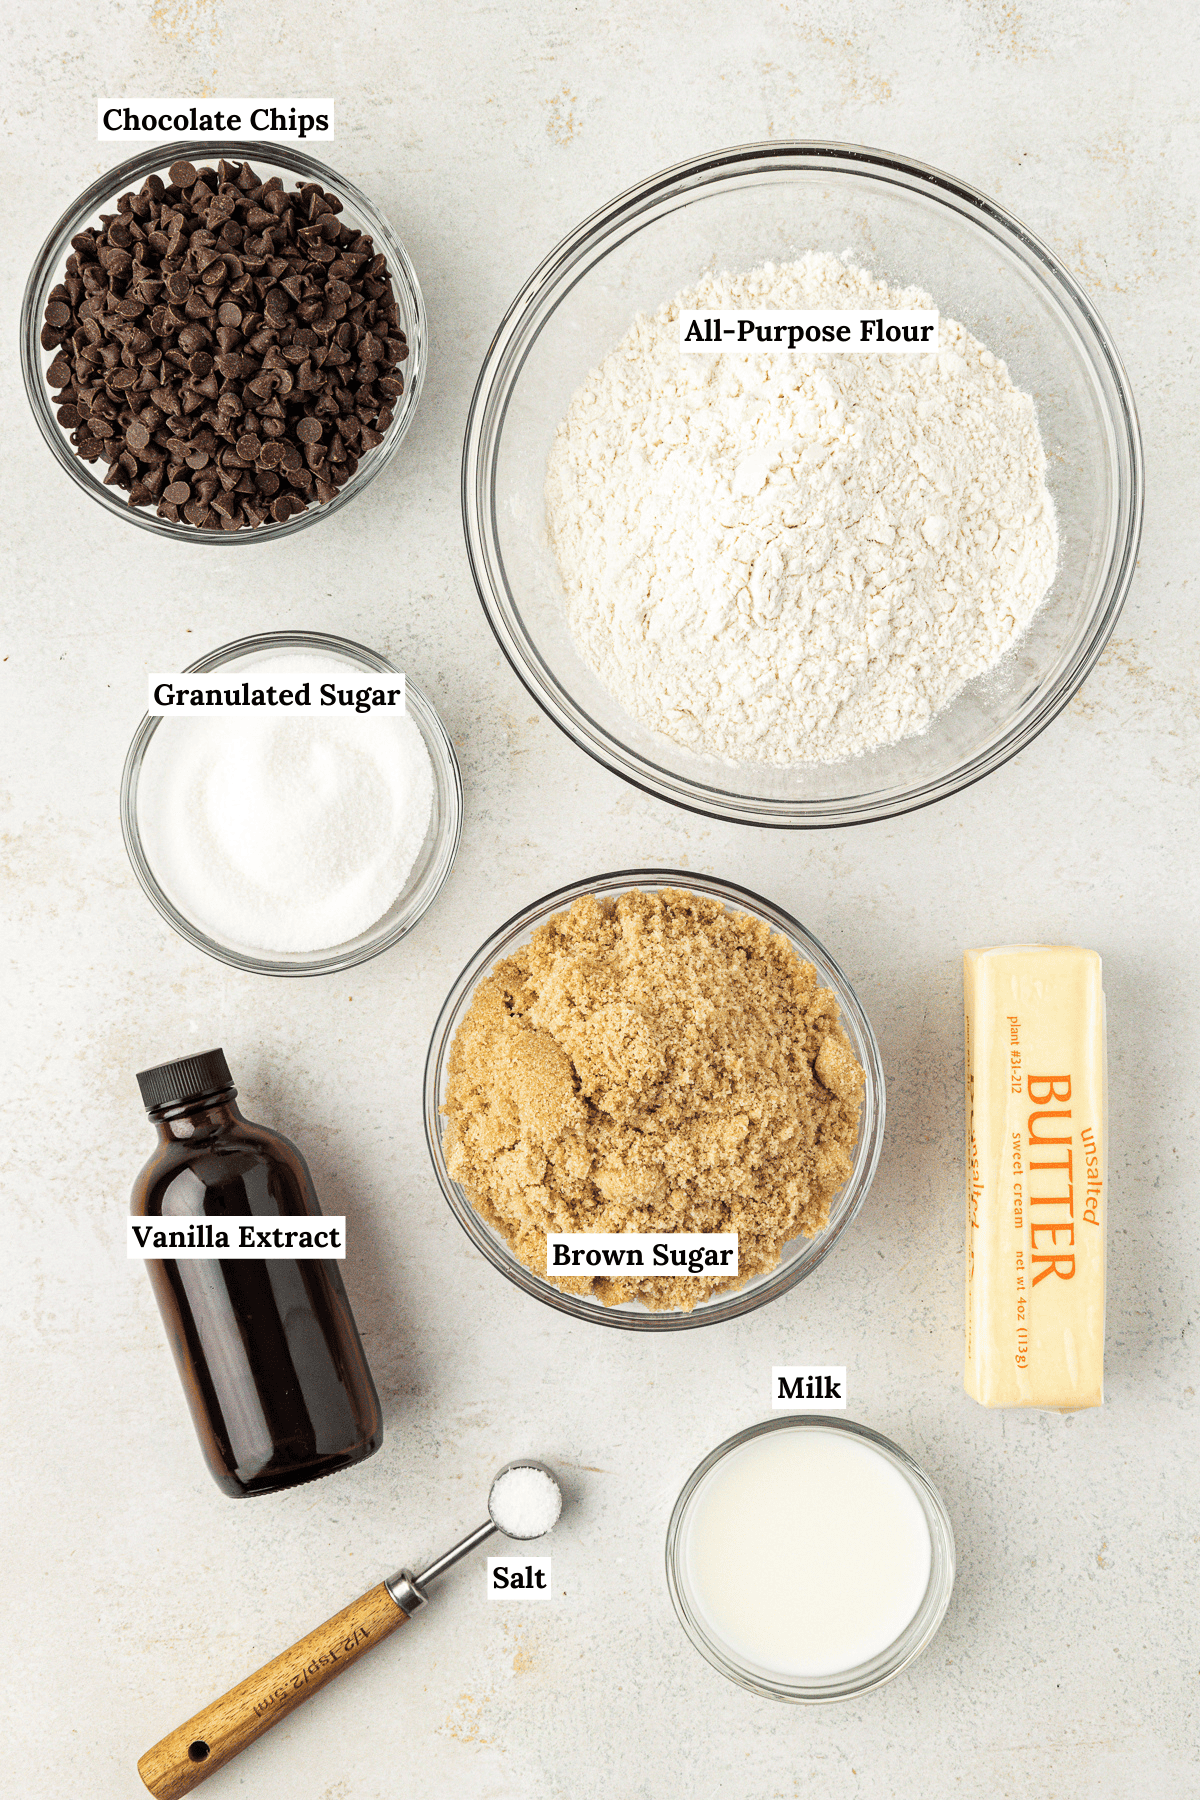 overhead view of edible cookie dough ingredients including chocolate chips, all-purpose flour, granulated sugar, brown sugar, vanilla extract, butter, milk and salt